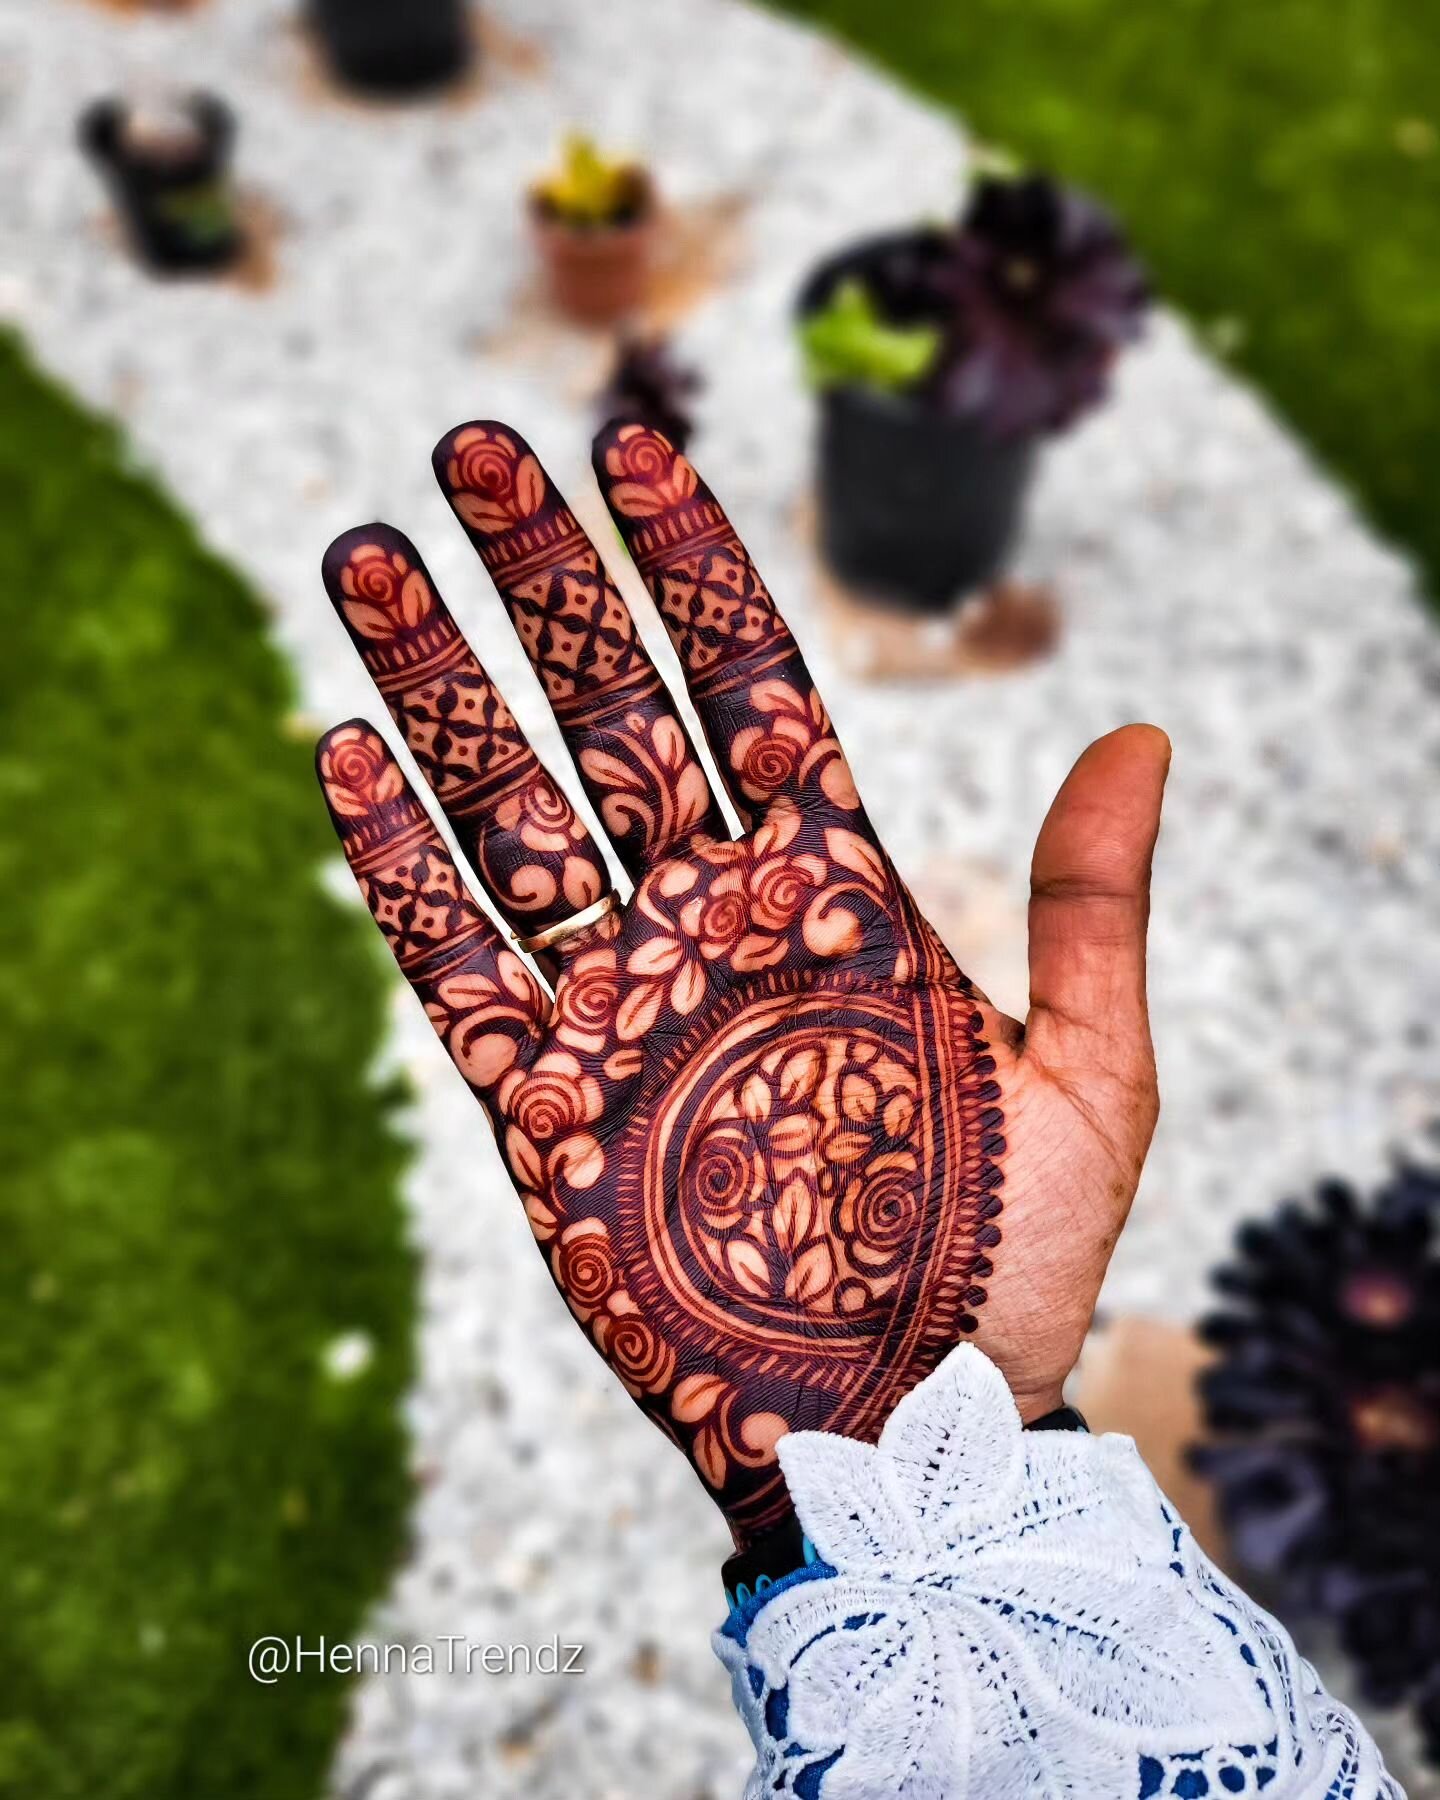 FOLLOW @hennatrendz
YOUTUBE: HennaTrendz

💖💖Weekends are the best time to place your orders for fresh henna cones... I mix fresh batches every weekend to ship out on Monday!! visit link in bio and go to SHOP page for pricing and shipping details.
_